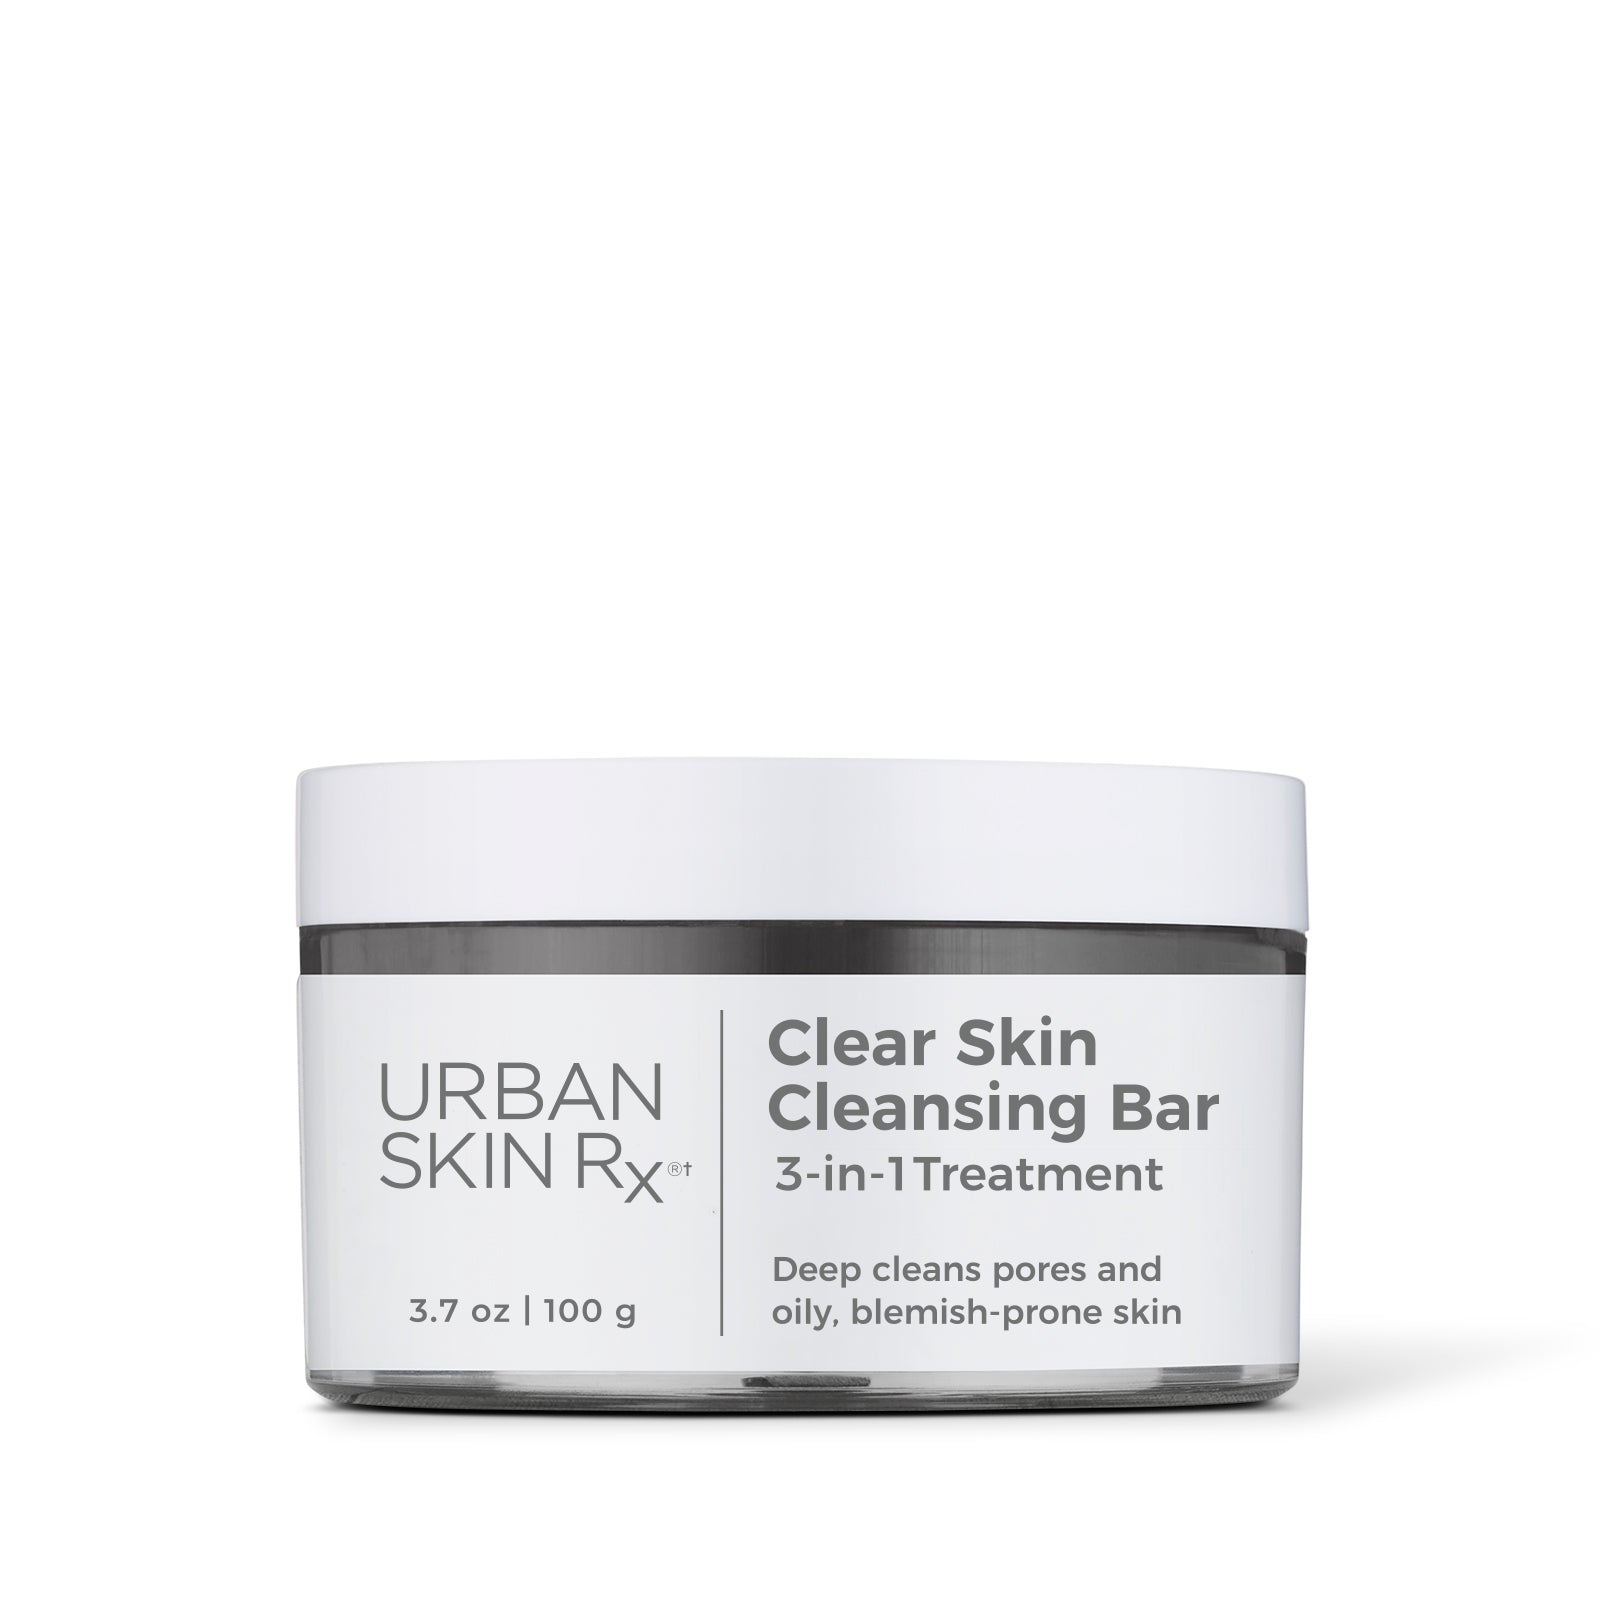 Award-Winning Clear and Even Tone Body Cleansing Bar